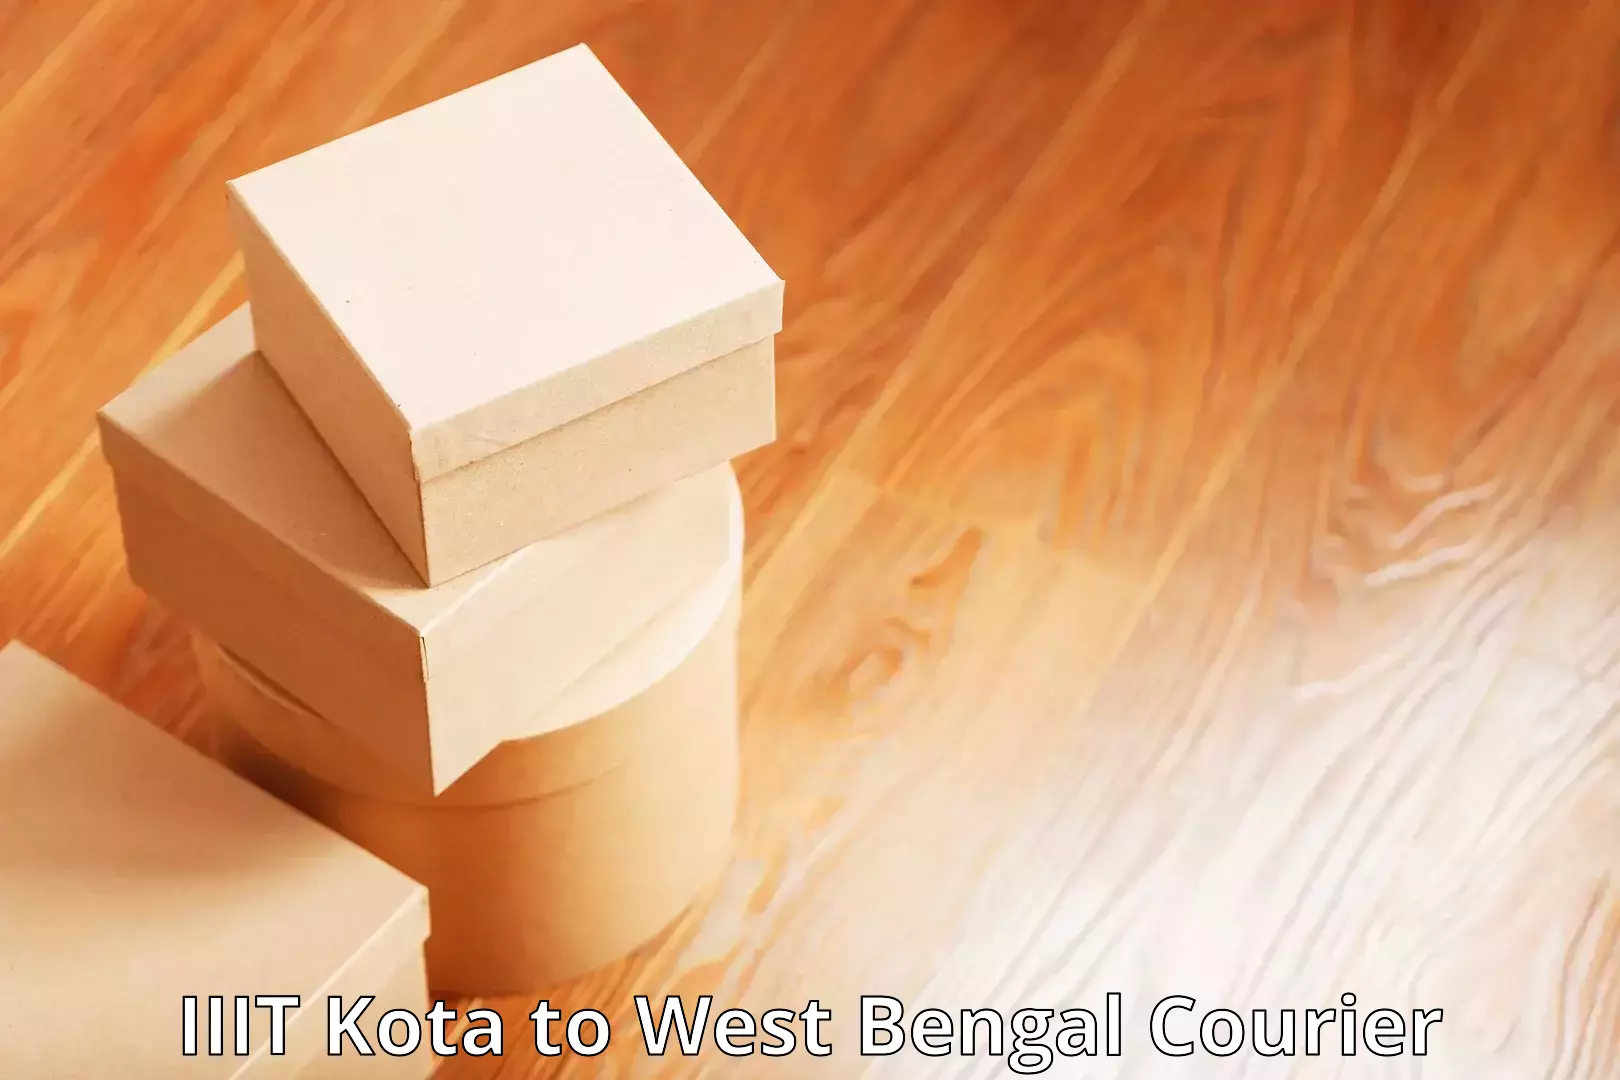 Same-day delivery solutions IIIT Kota to West Bengal